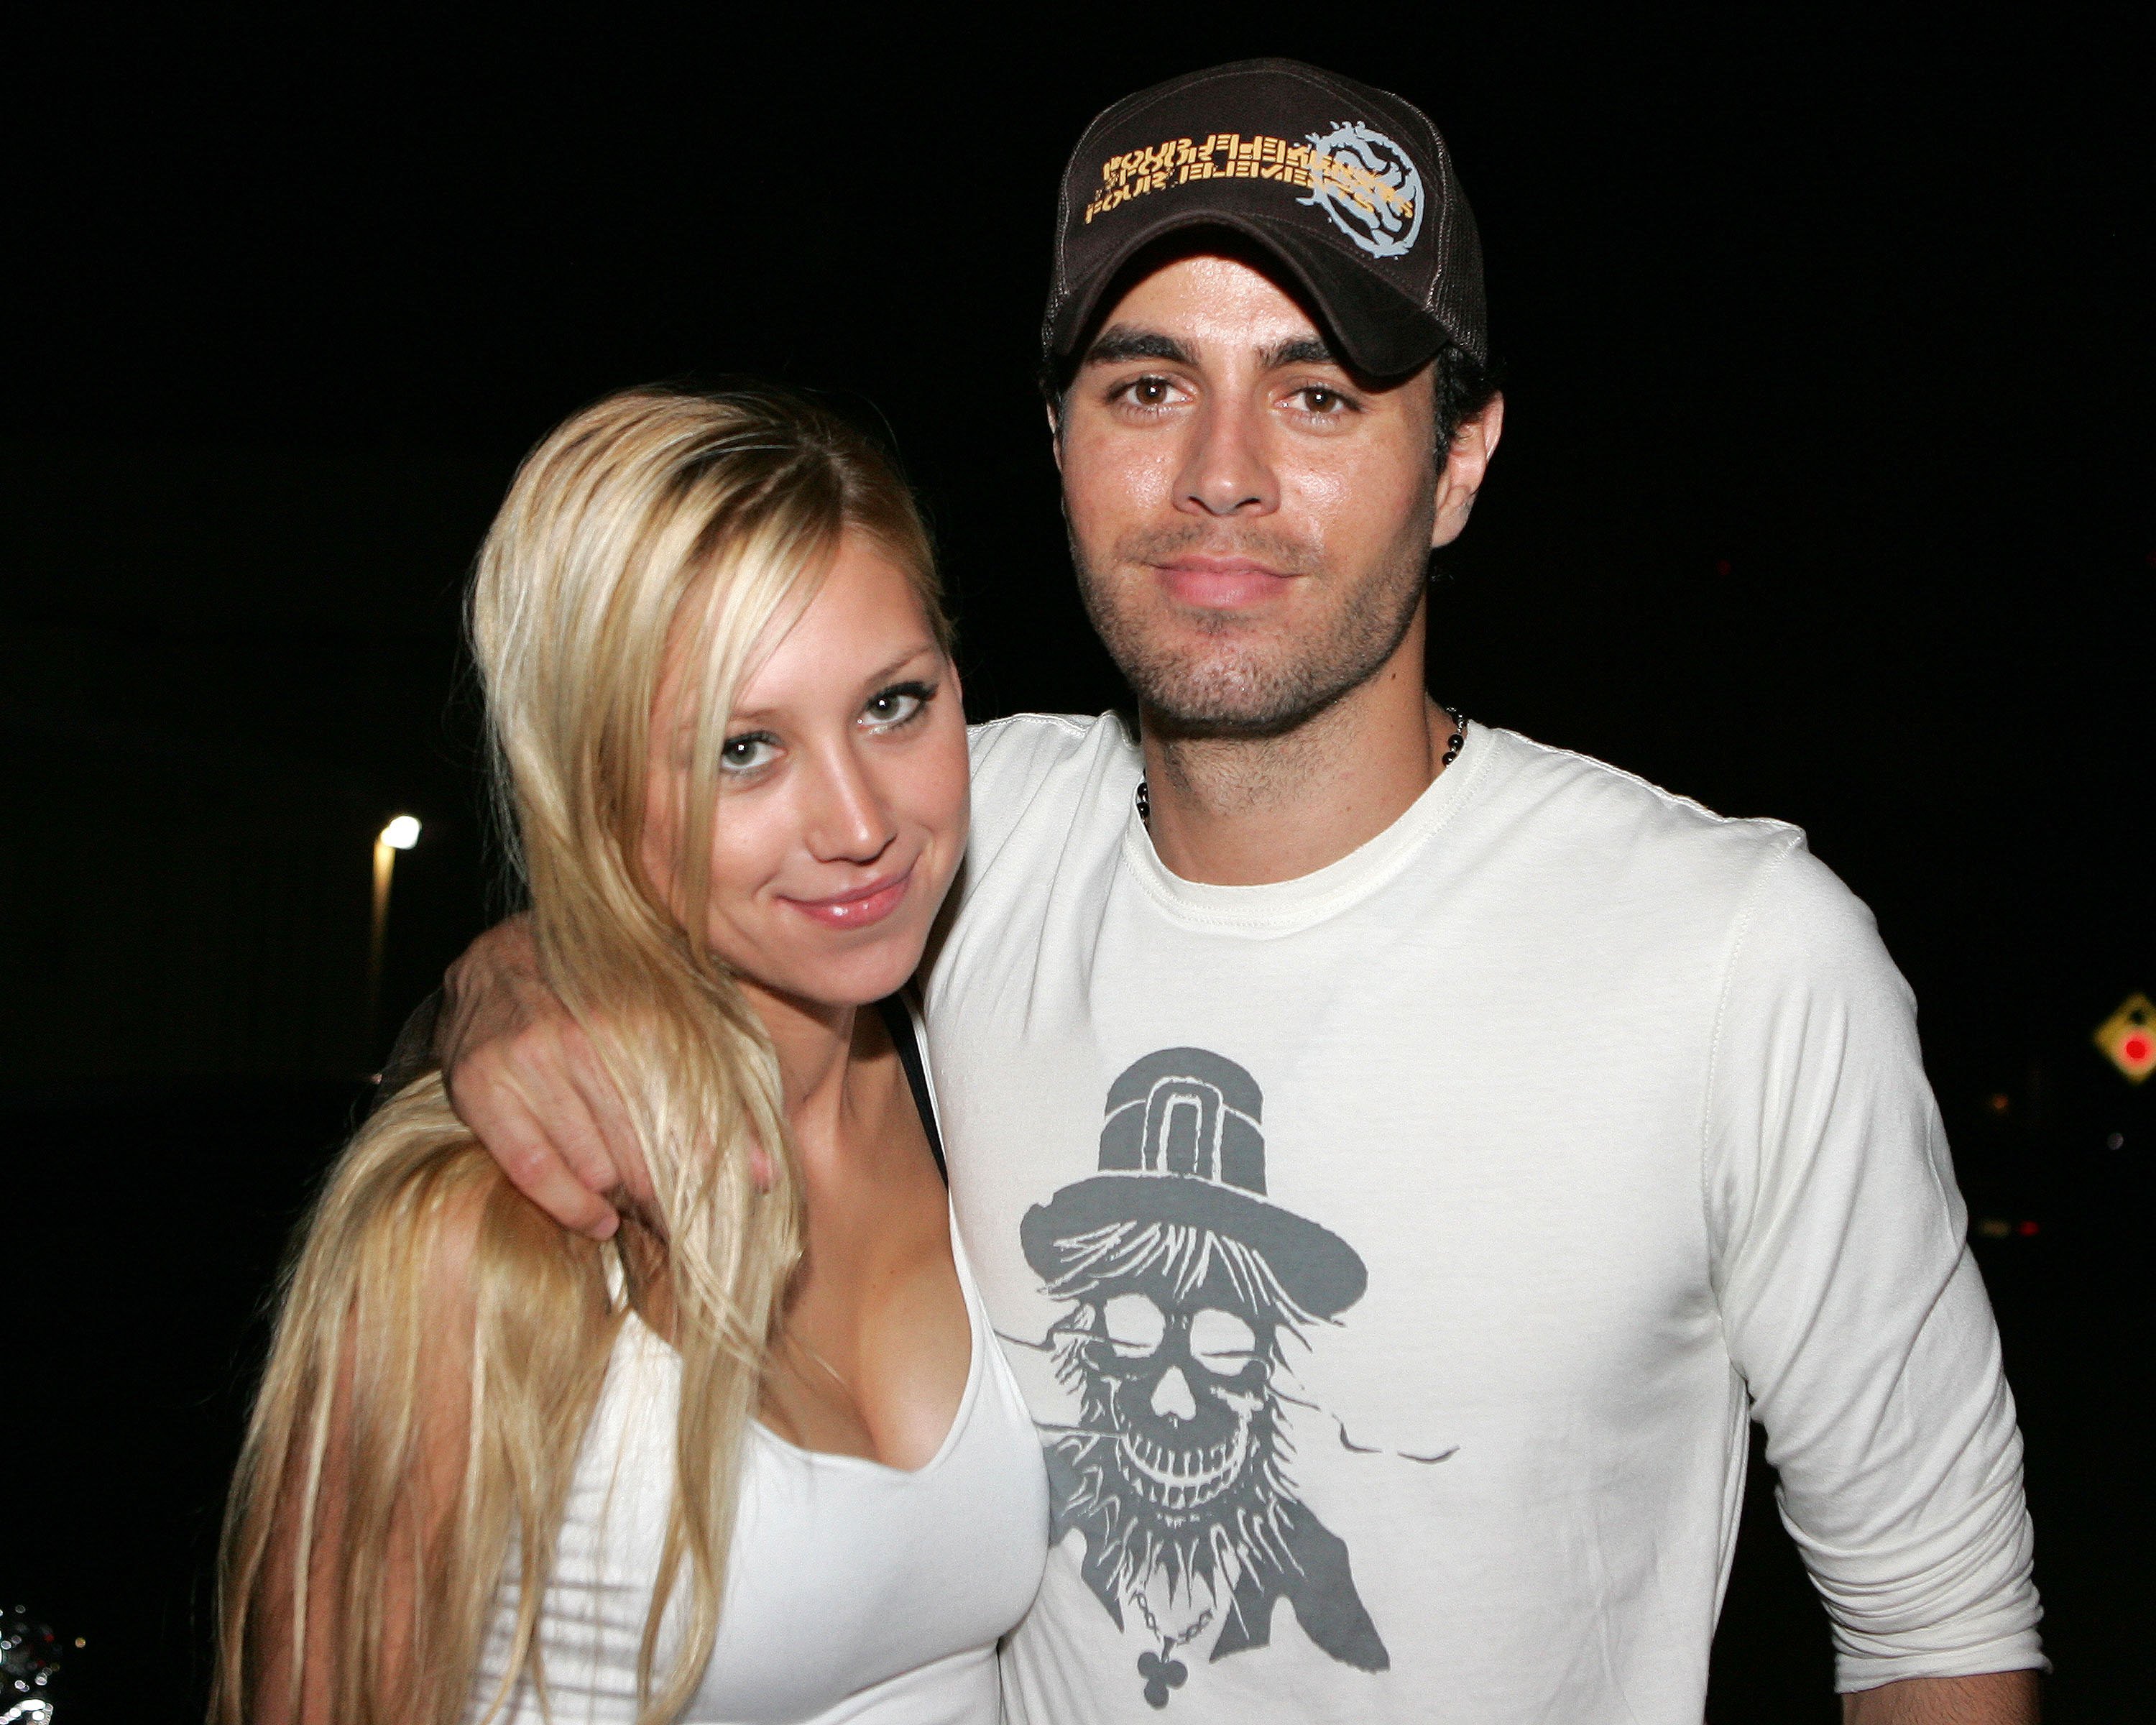 Anna Kournikova and Enrique Iglesias leaving the Big Pink restaurant. Source | Photo: Getty Images